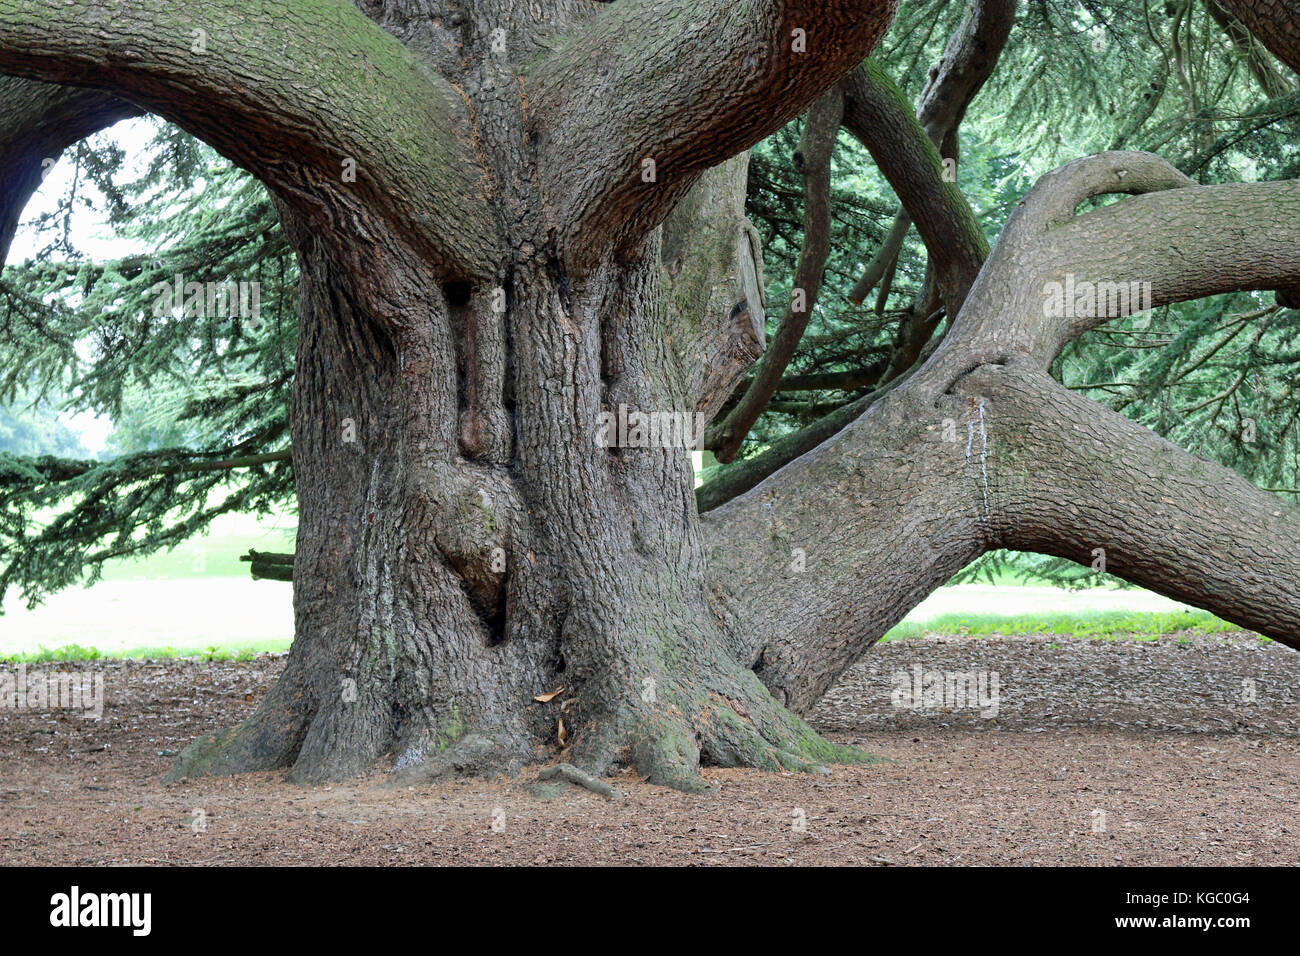 Trunk and lower branches of a Cedar of Lebanon (Cedrus libani) in a parkland setting with trees and lawns in the background. Stock Photo